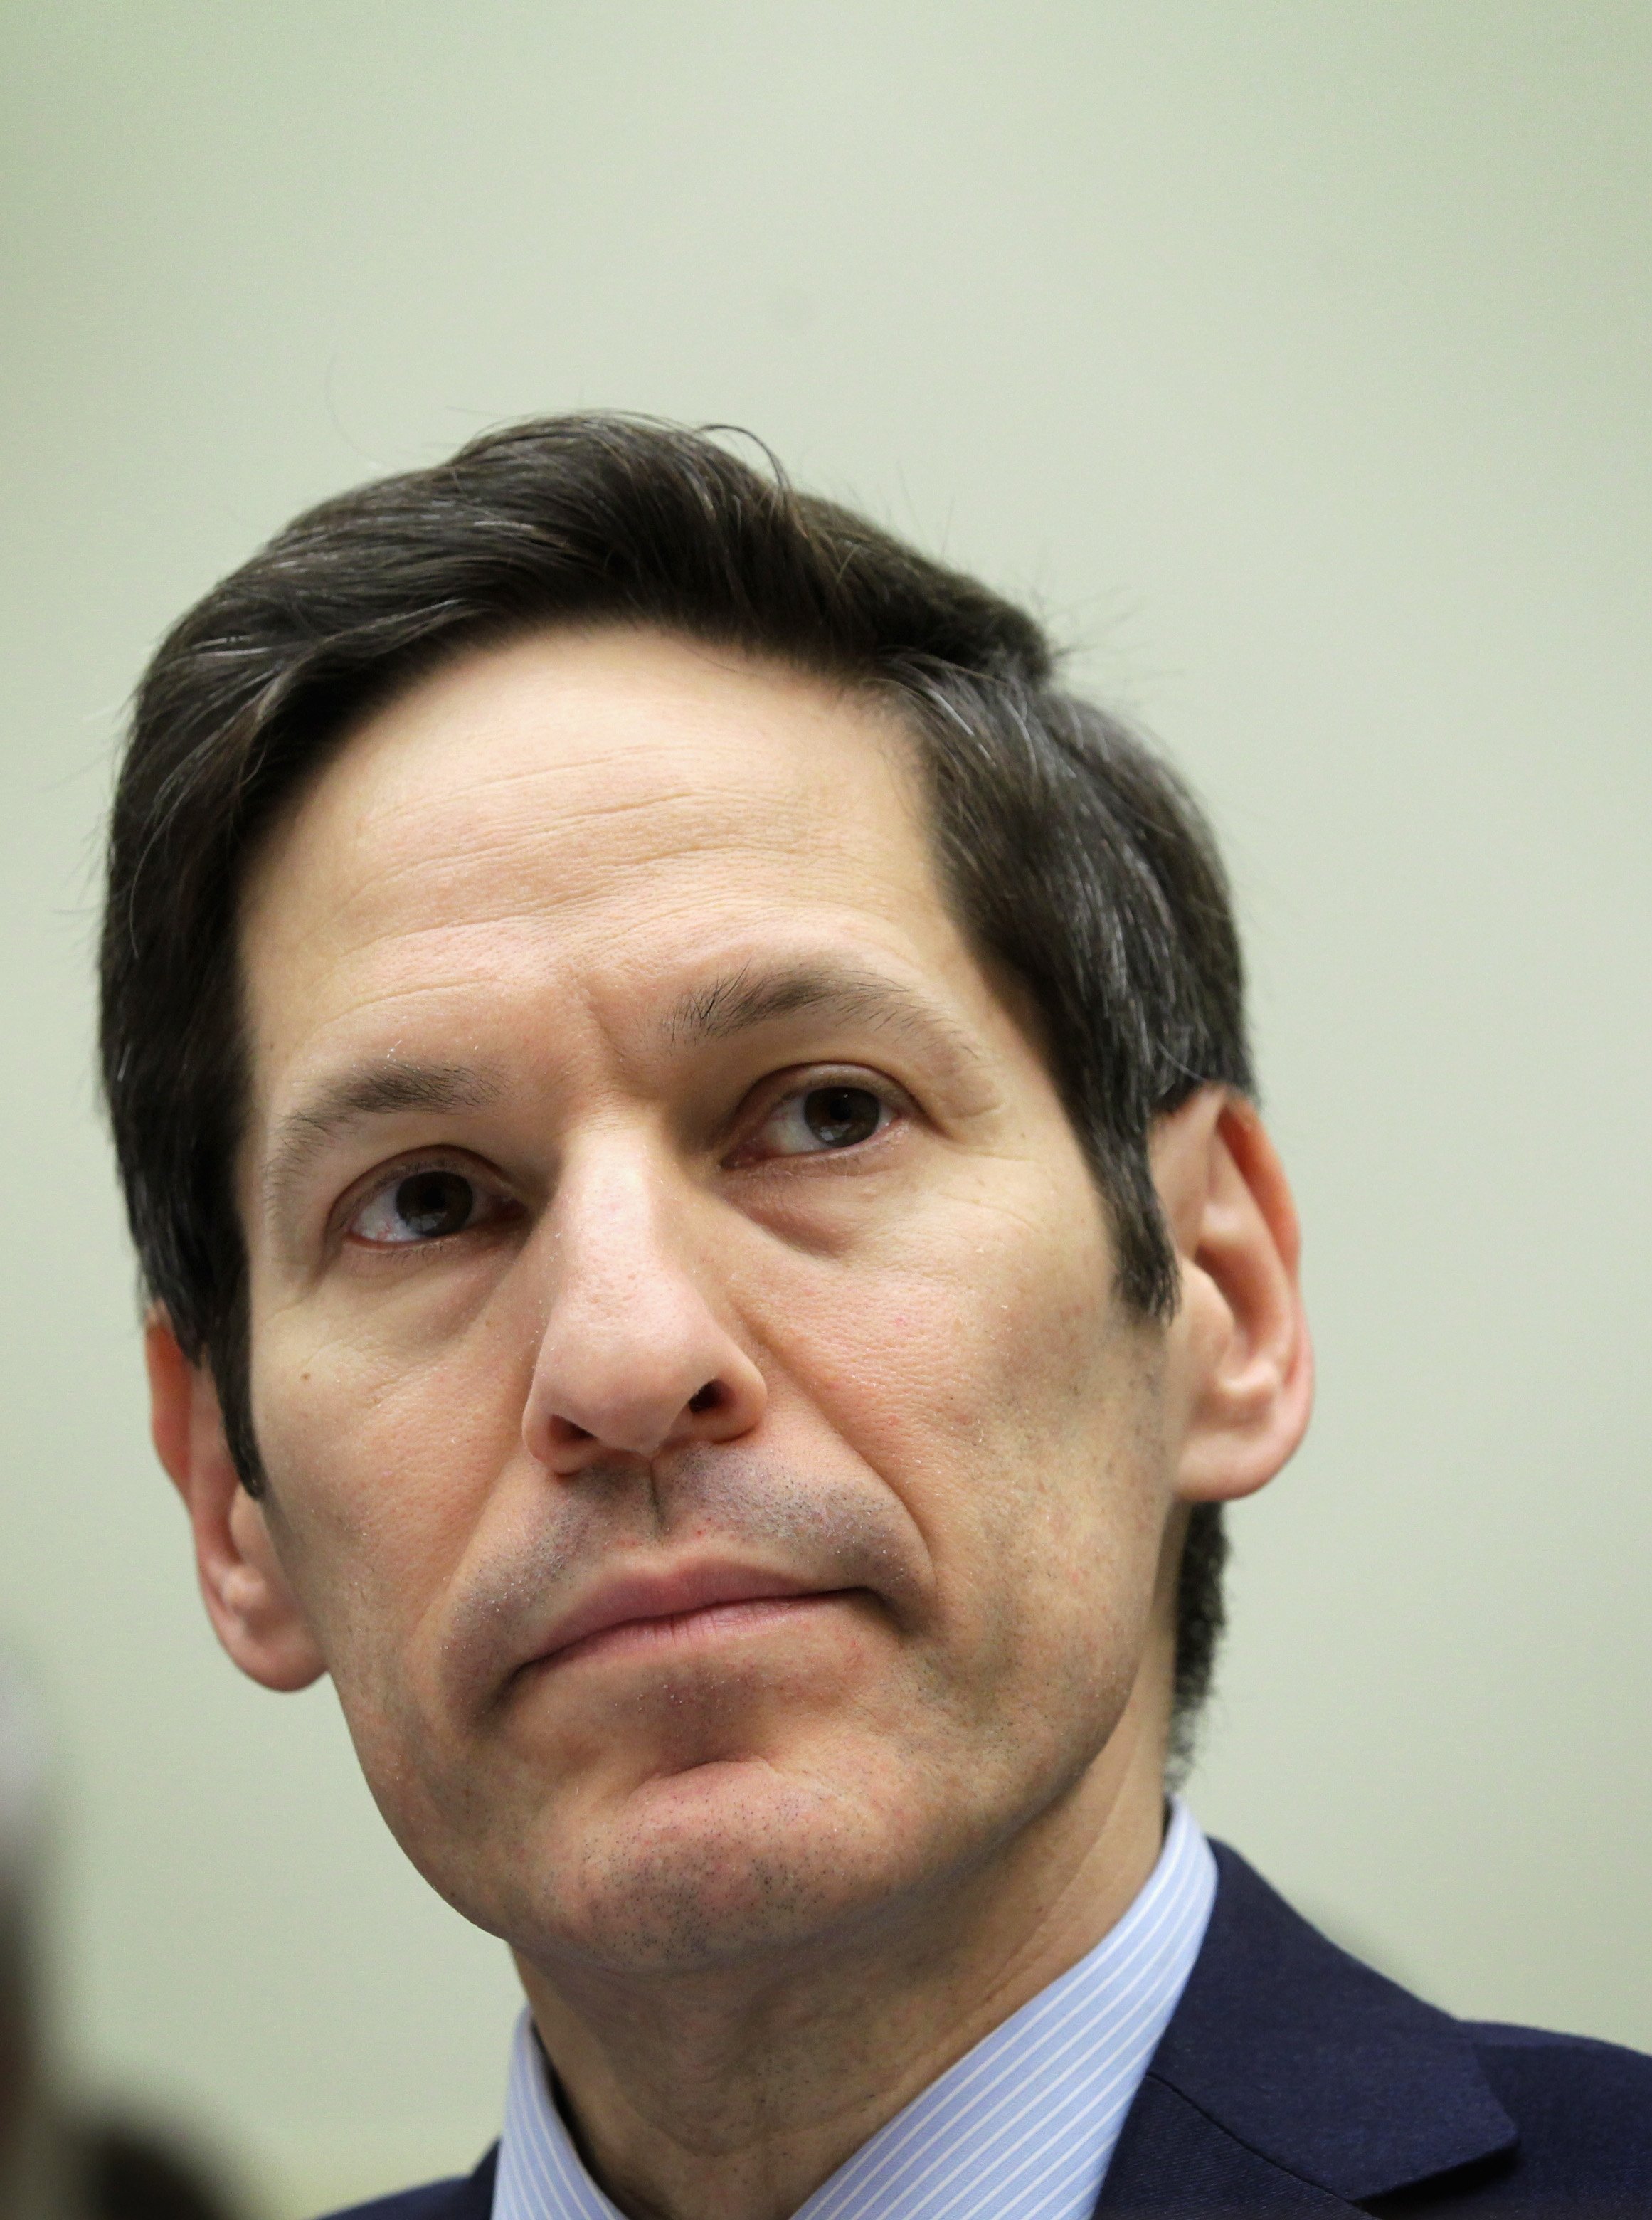 Director of Centers for Disease Control and Prevention Tom Frieden testifies during a hearing before the Africa, Global Health, Global Human Rights and International Organizations Subcommittee of the House Foreign Affairs Committee on Aug. 7, 2014 in Washington.